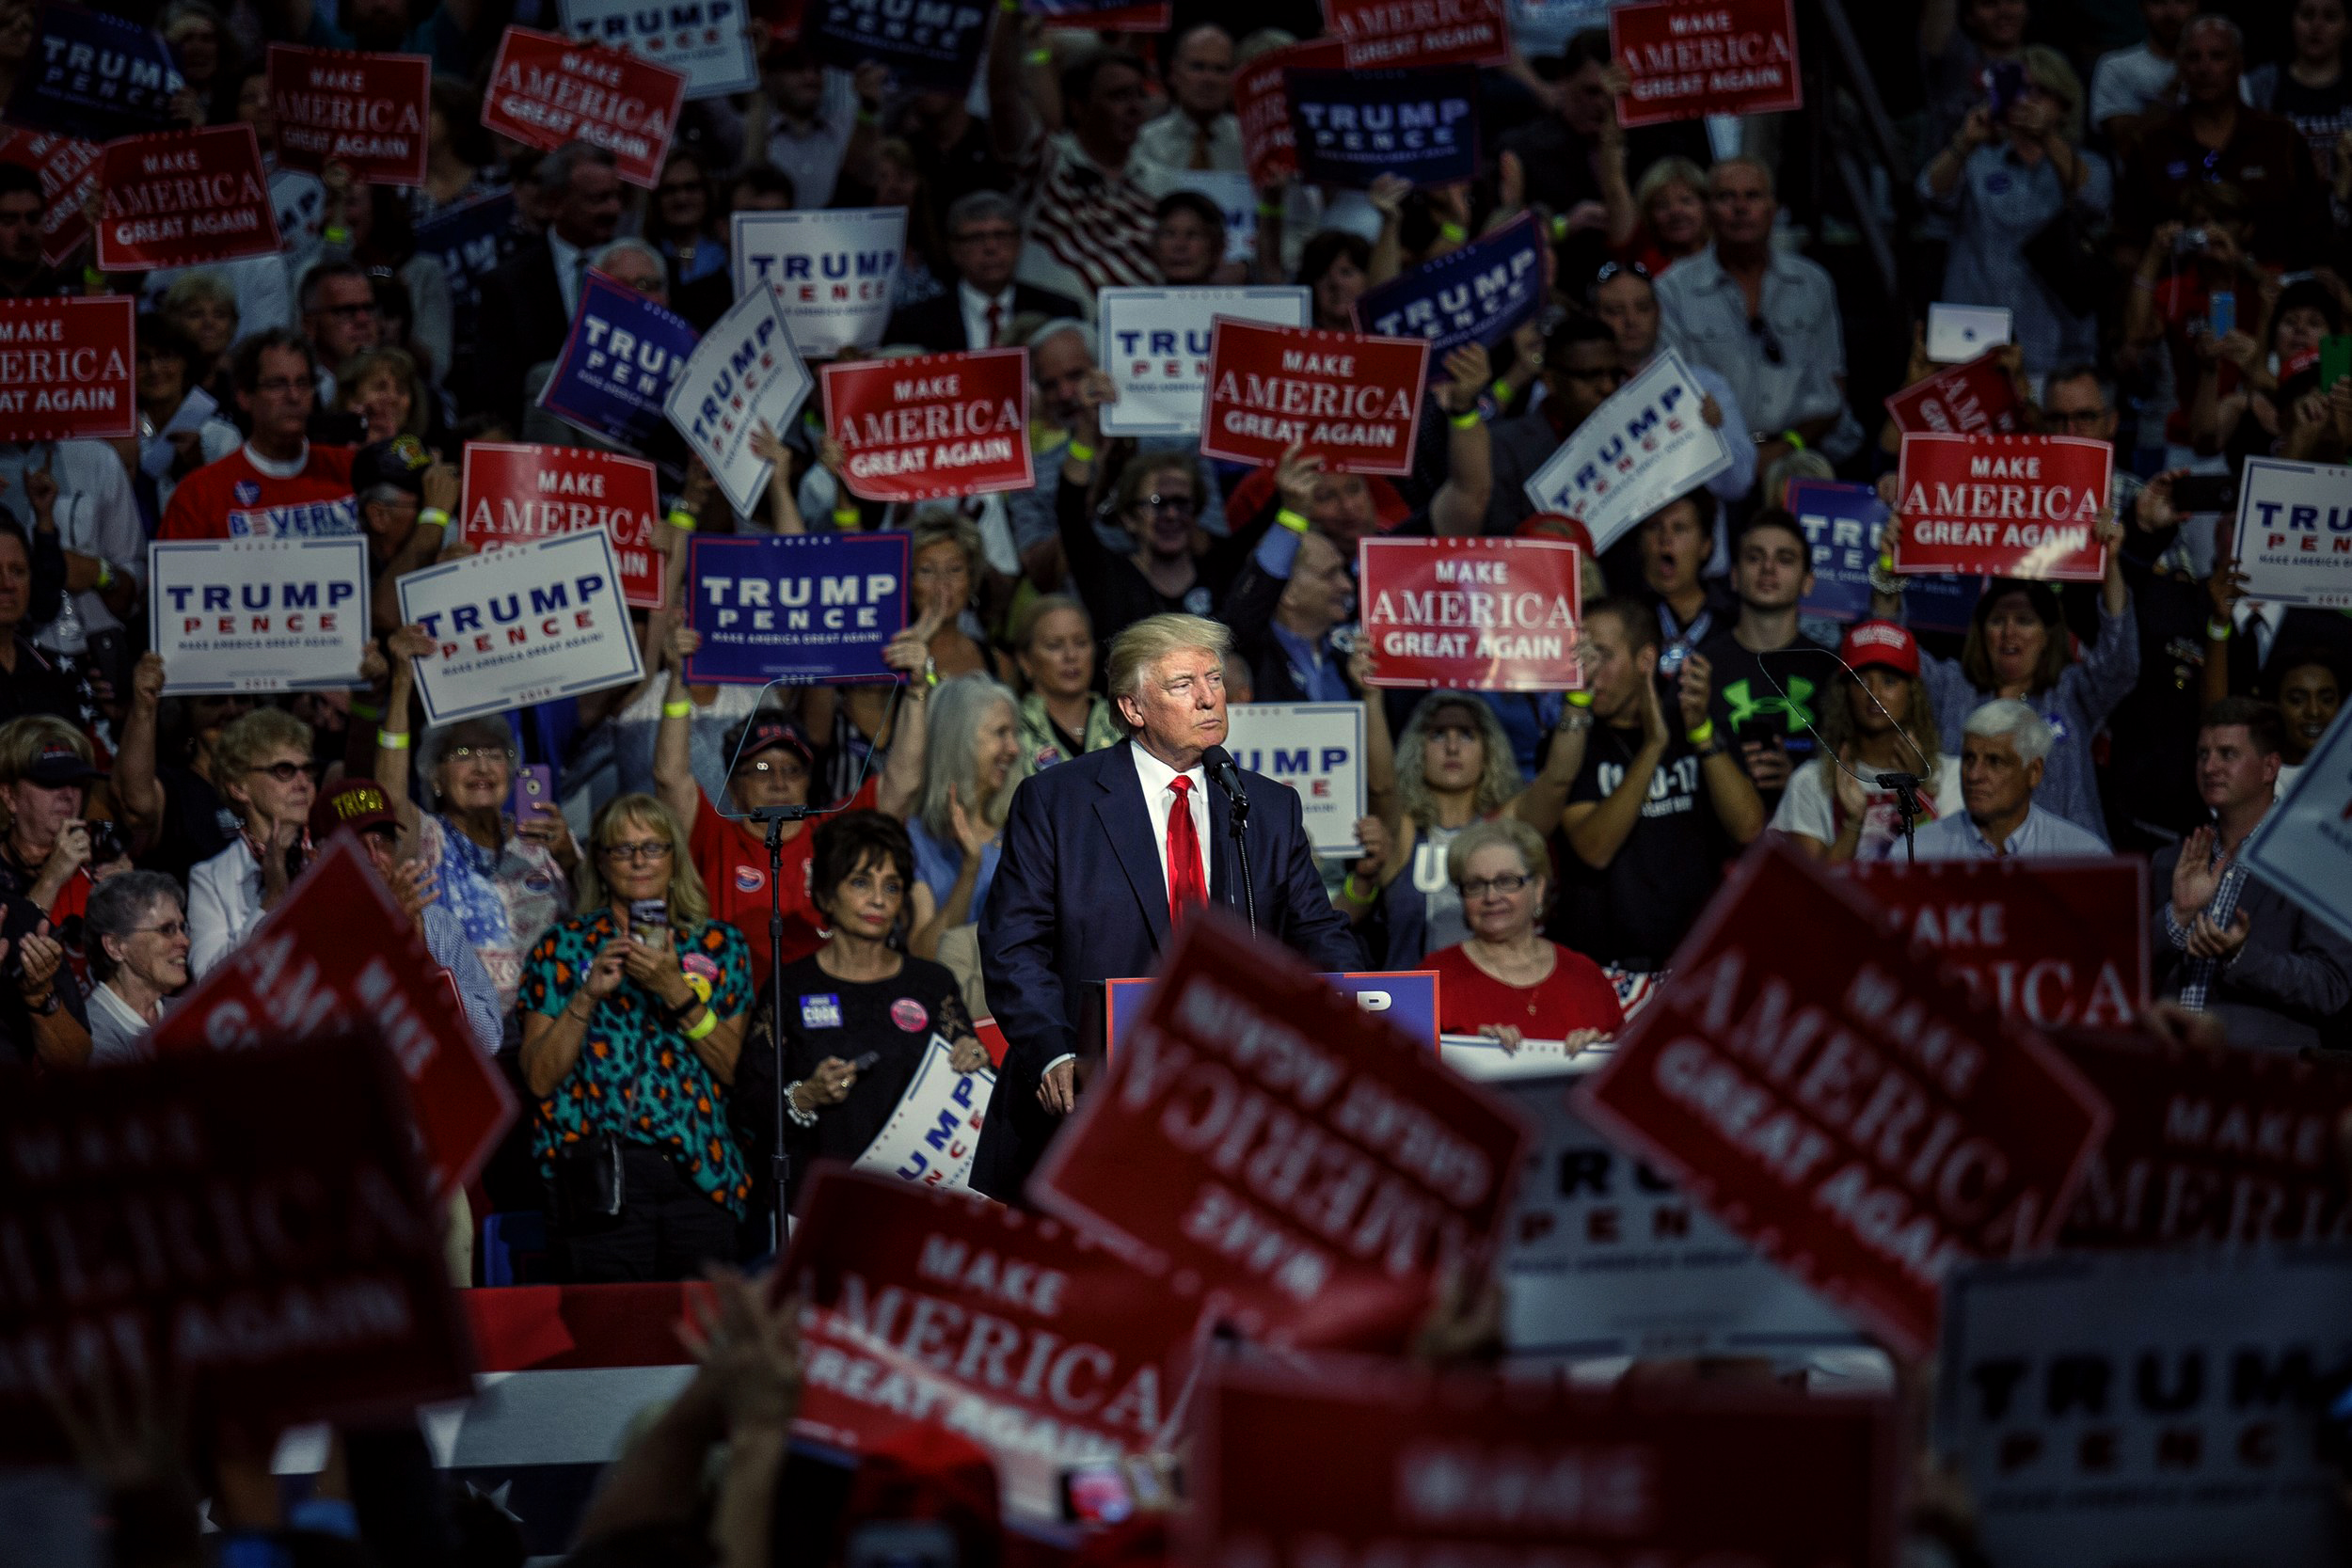  Republican presidential nominee Donald Trump speaks to supporters during his rally at James A. Rhodes Arena in Akron, Ohio on Monday, Aug. 22, 2016. 